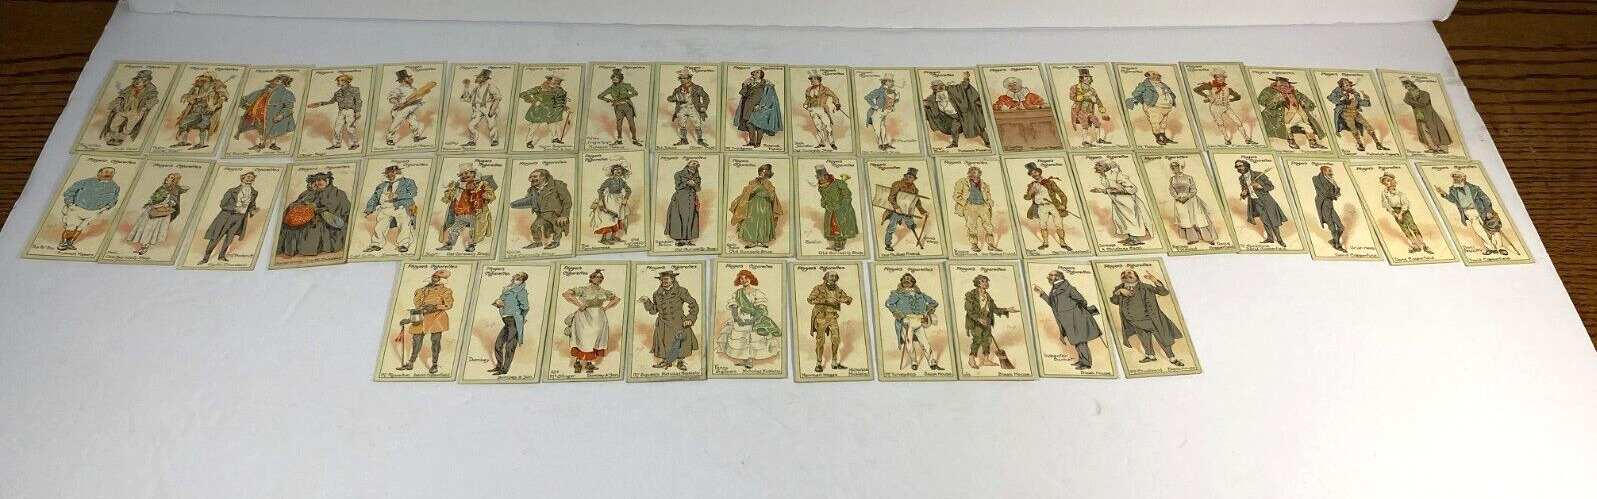 1912 JOHN PLAYER-CHARACTERS FROM DICKENS-ORIGINAL 112-YEAR-OLD-FULL 50 CARD SET